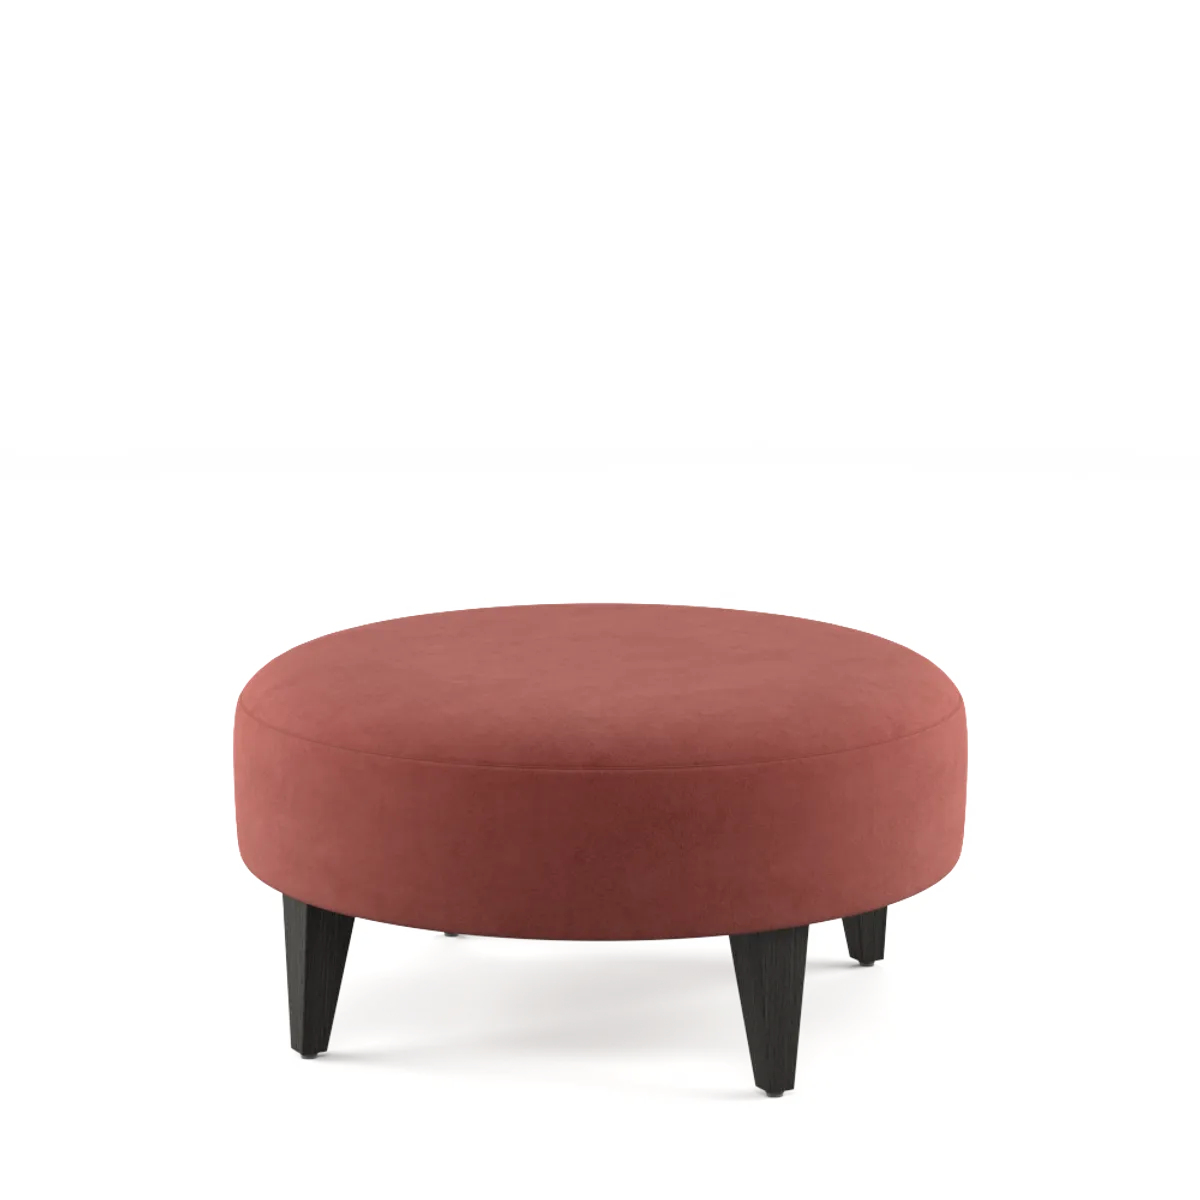 Bepsoke Pollen Round Ottoman Inside Out Contracts 2501